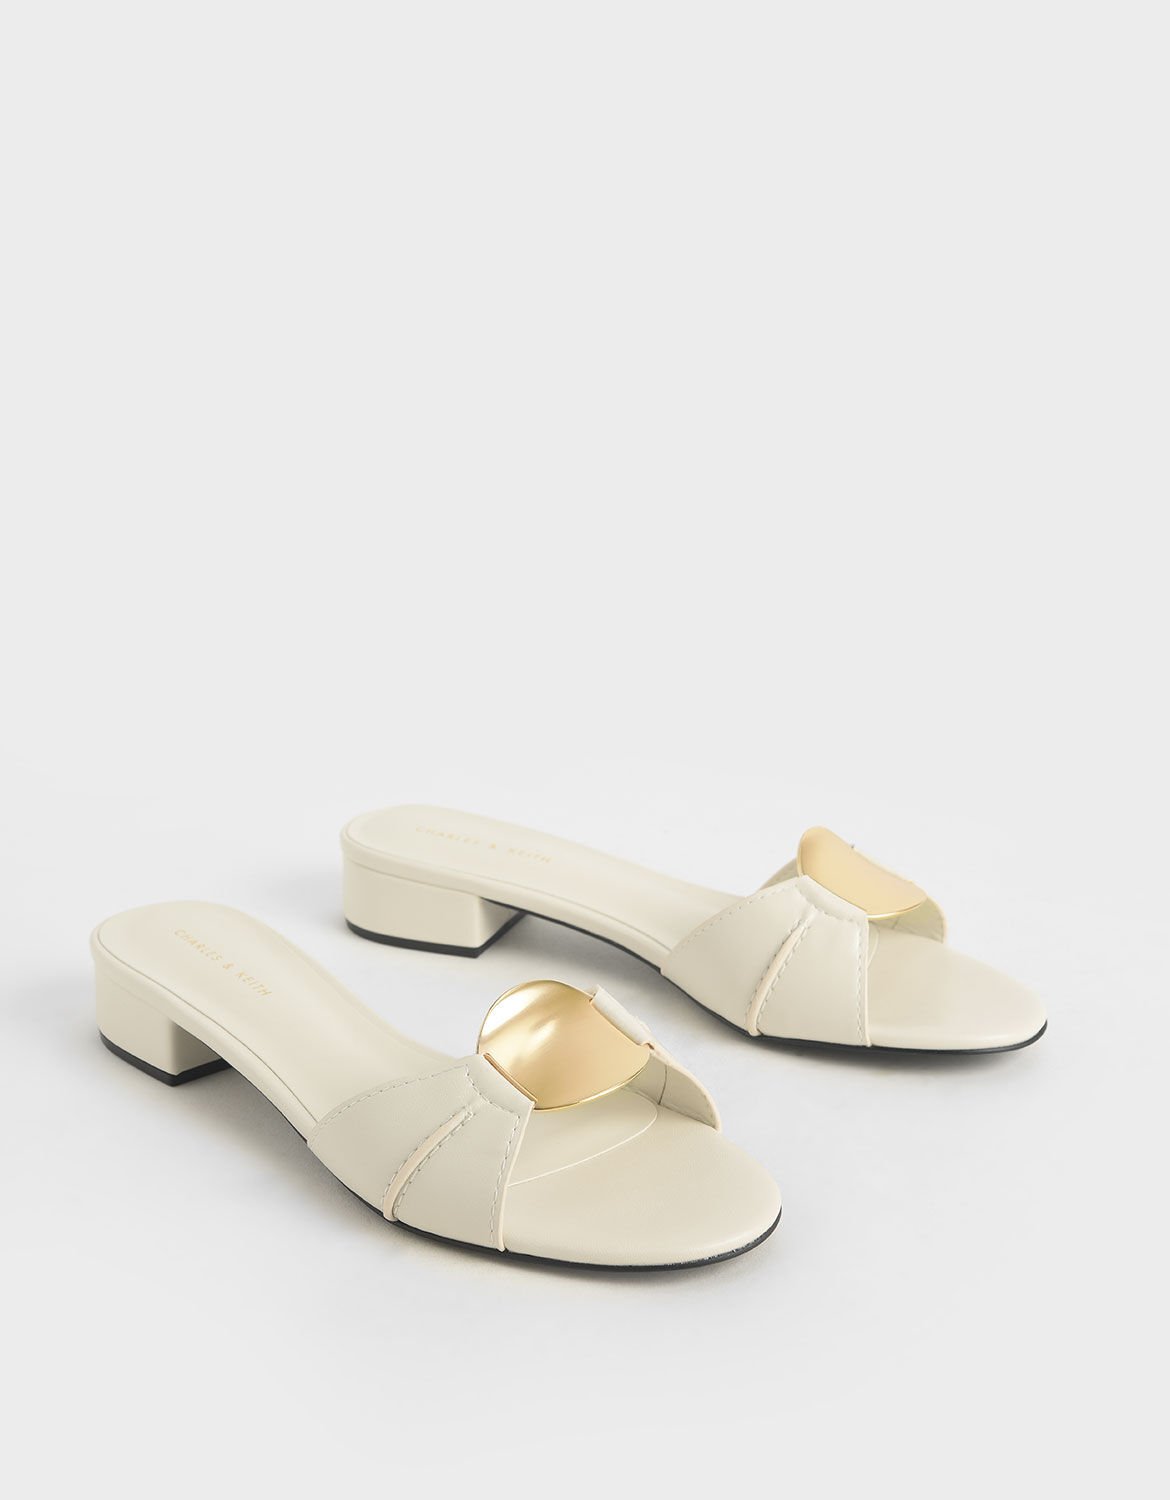 Shop Women's Shoes | Exclusive Styles | CHARLES & KEITH SG